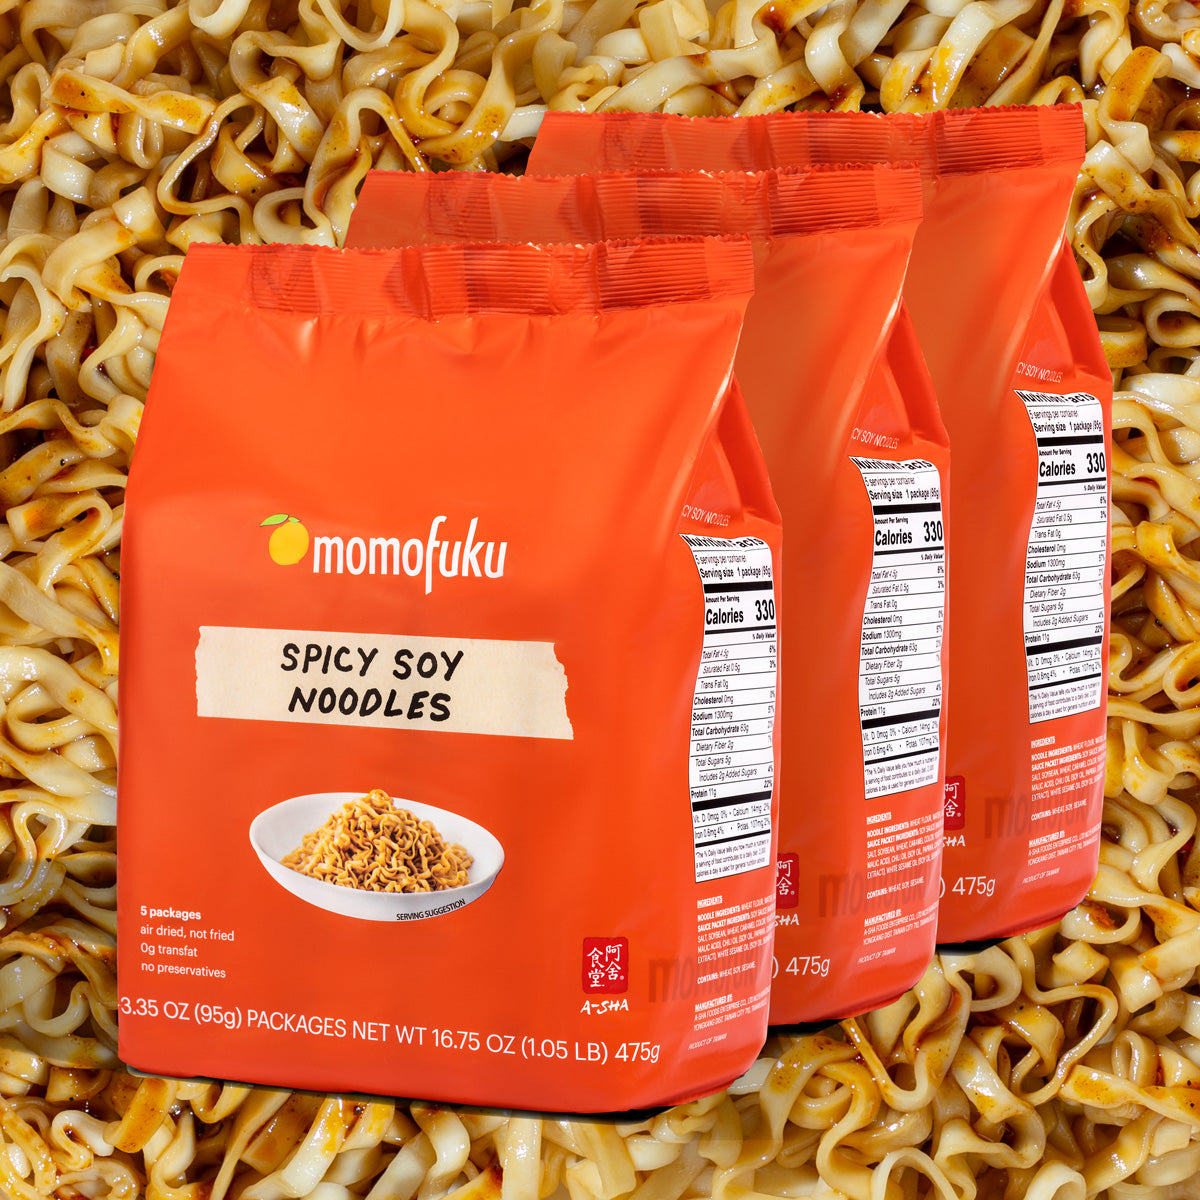 3 packs of spicy soy noodles